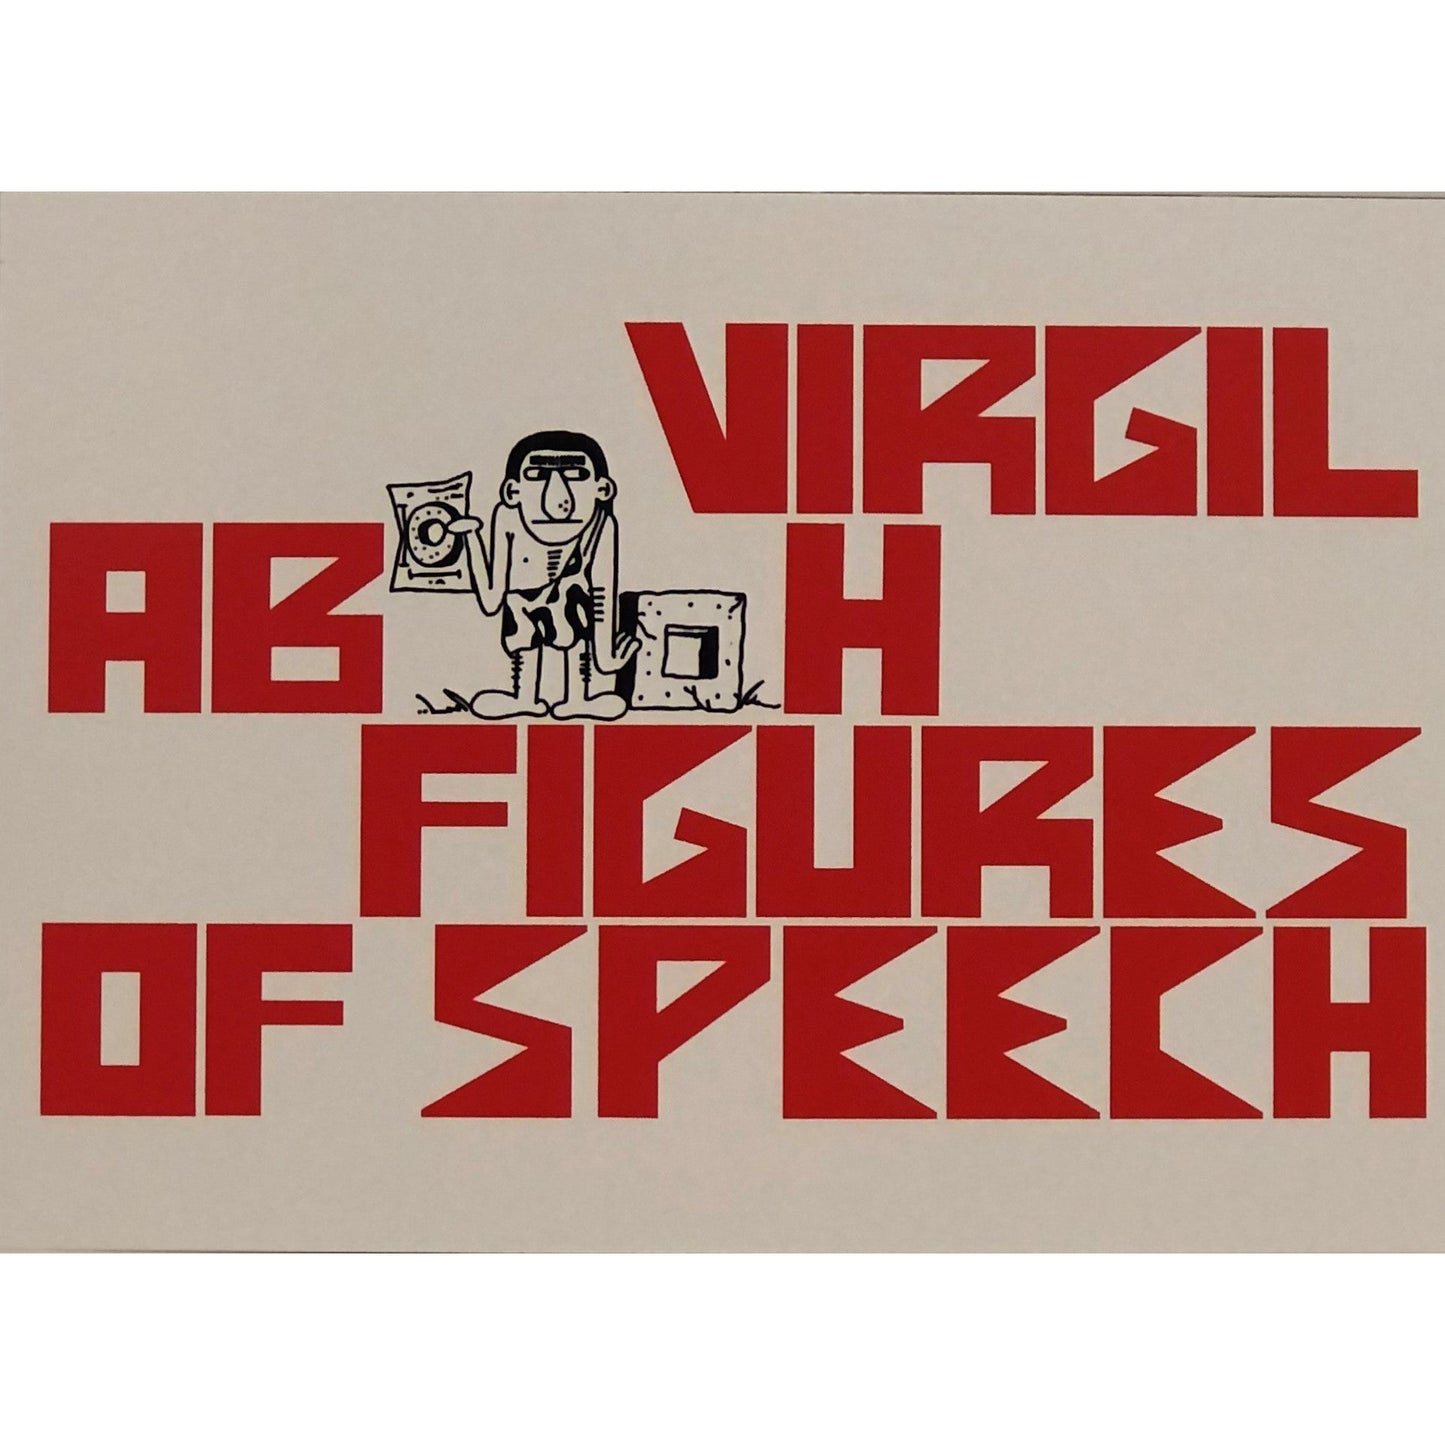 You Can See Virgil Abloh's Figures of Speech Exhibit at the High